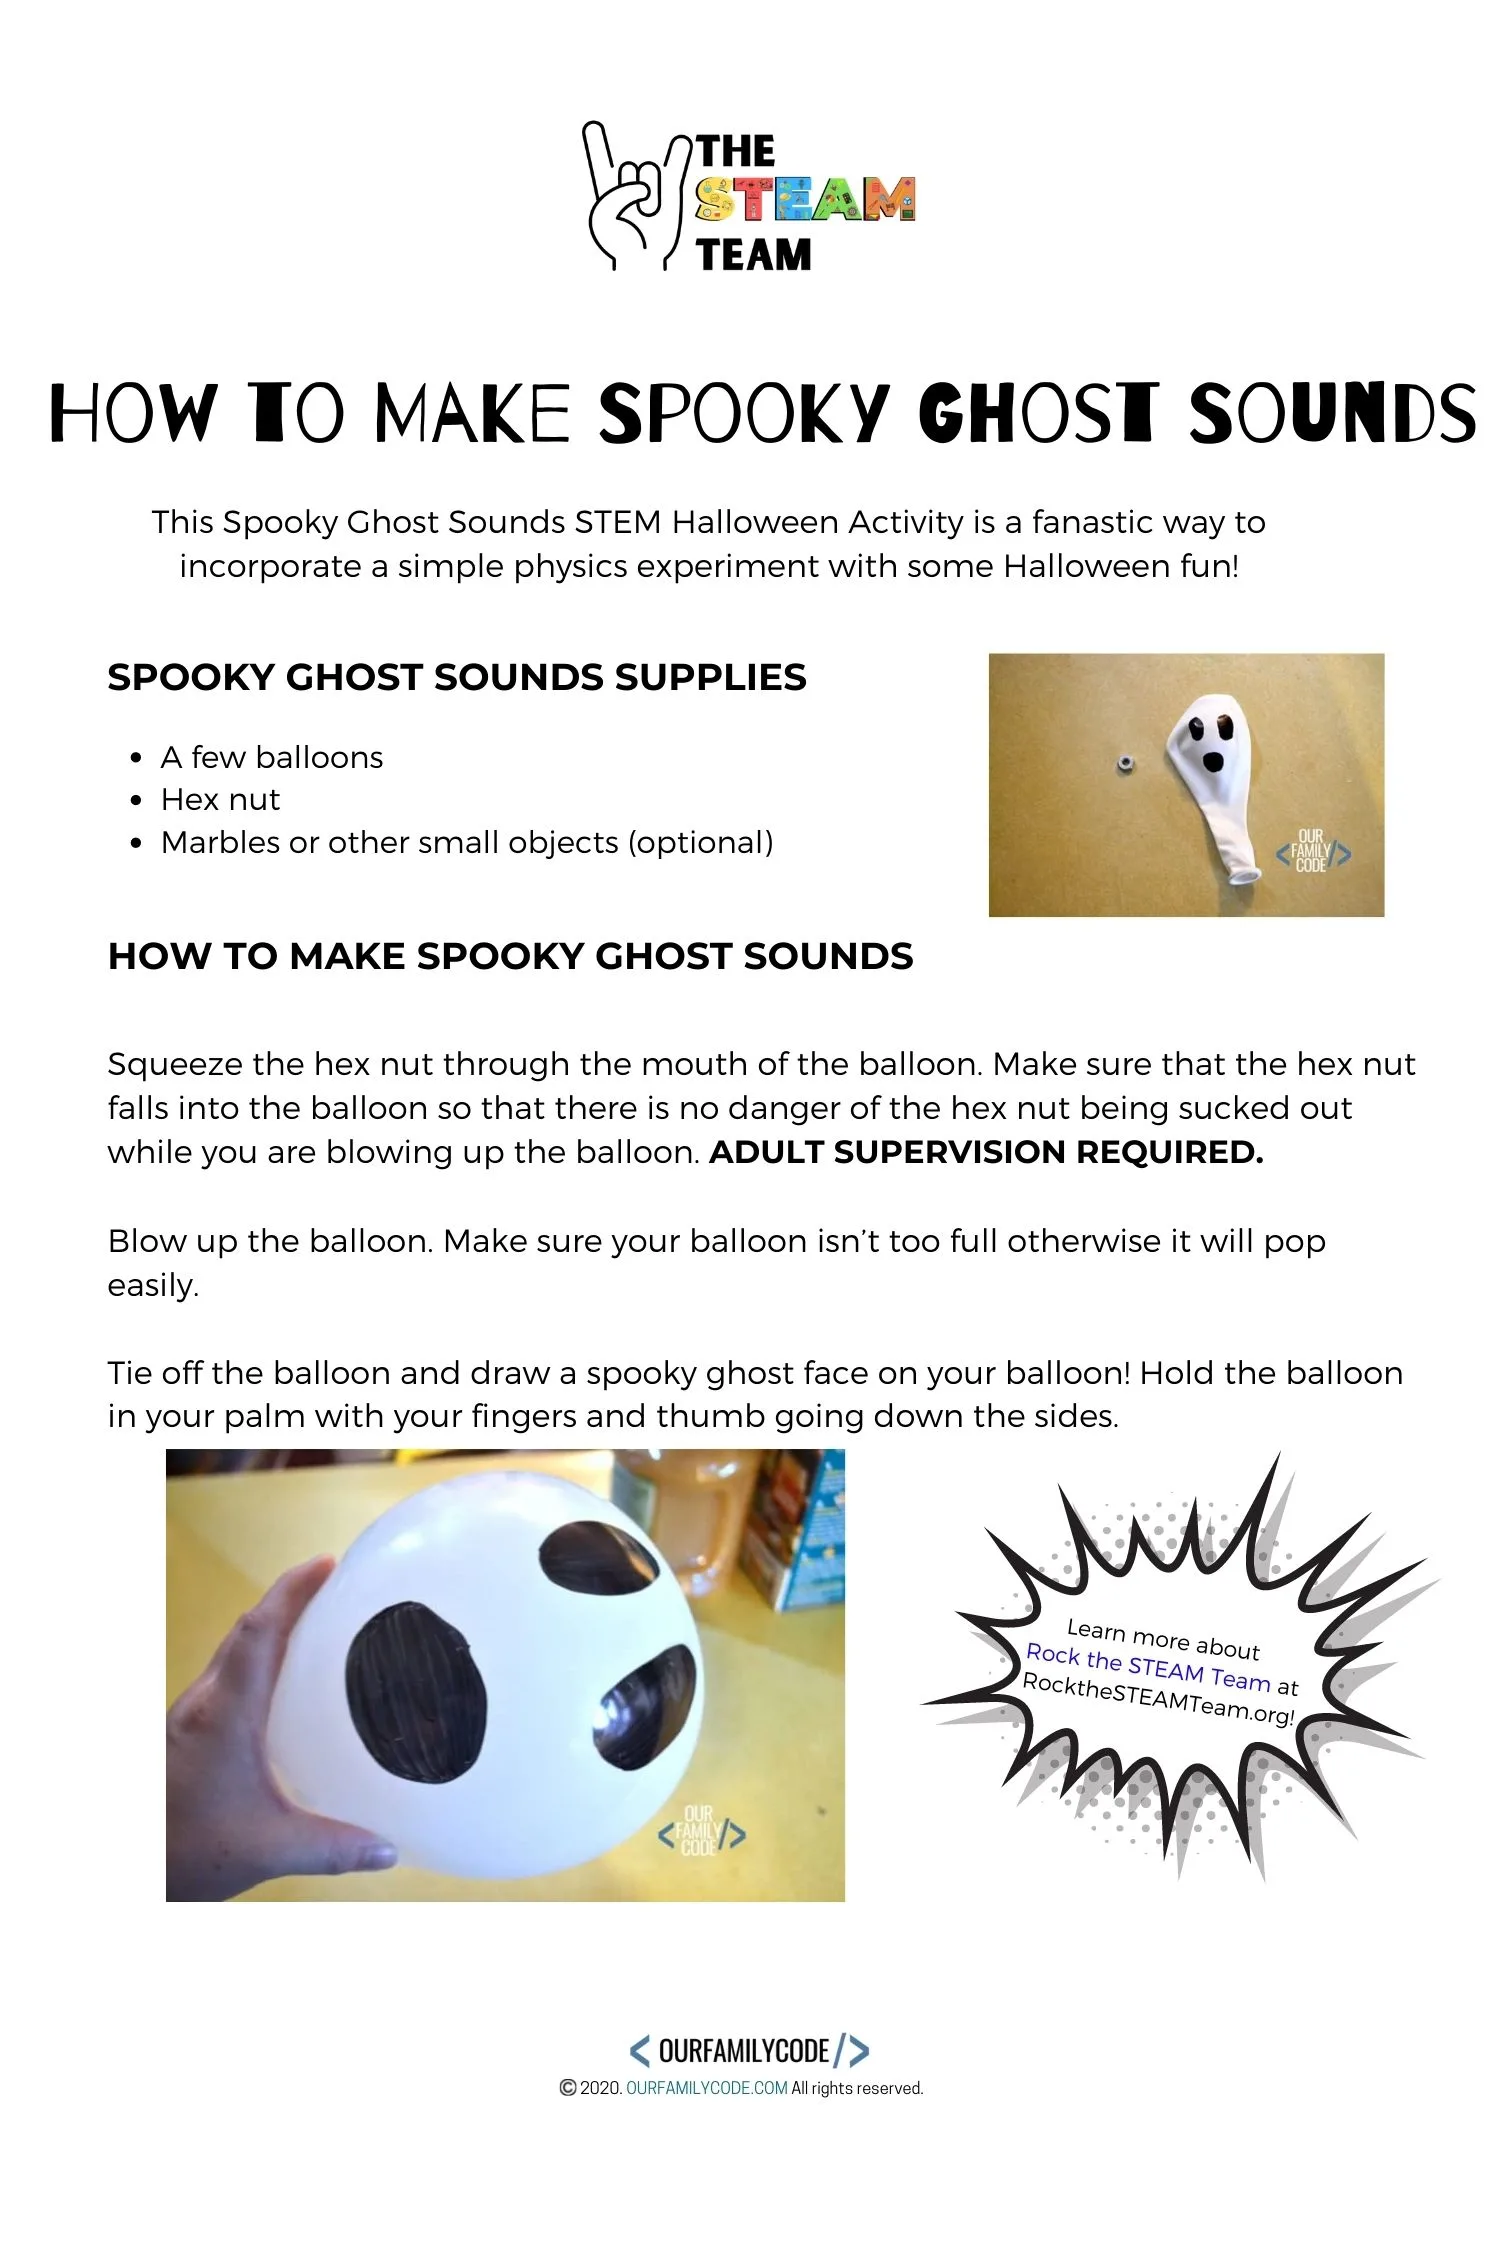 Rock-the-STEAM-Team-Spooky-Ghost-Kit-Activity-Page-1